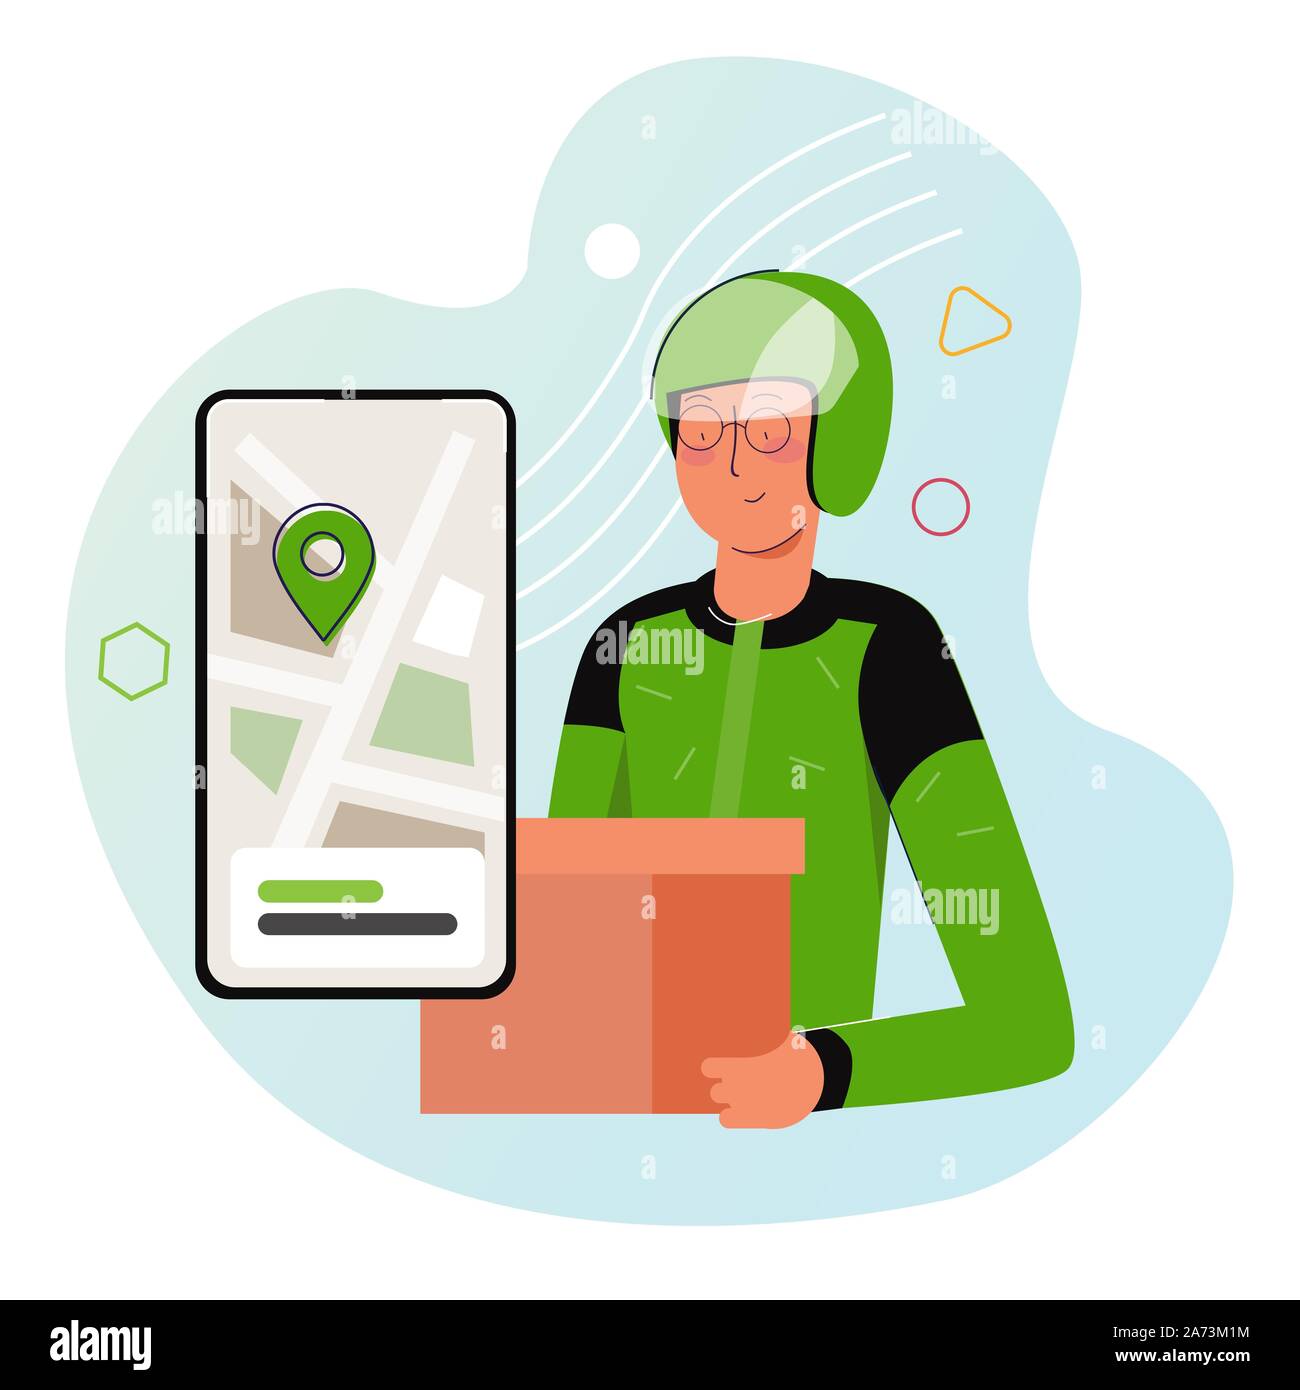 Courier from motorcycle ride-hailing service in Indonesia sending box of food to customer. Wearing green jacket and helmet with smart phone app with Stock Vector